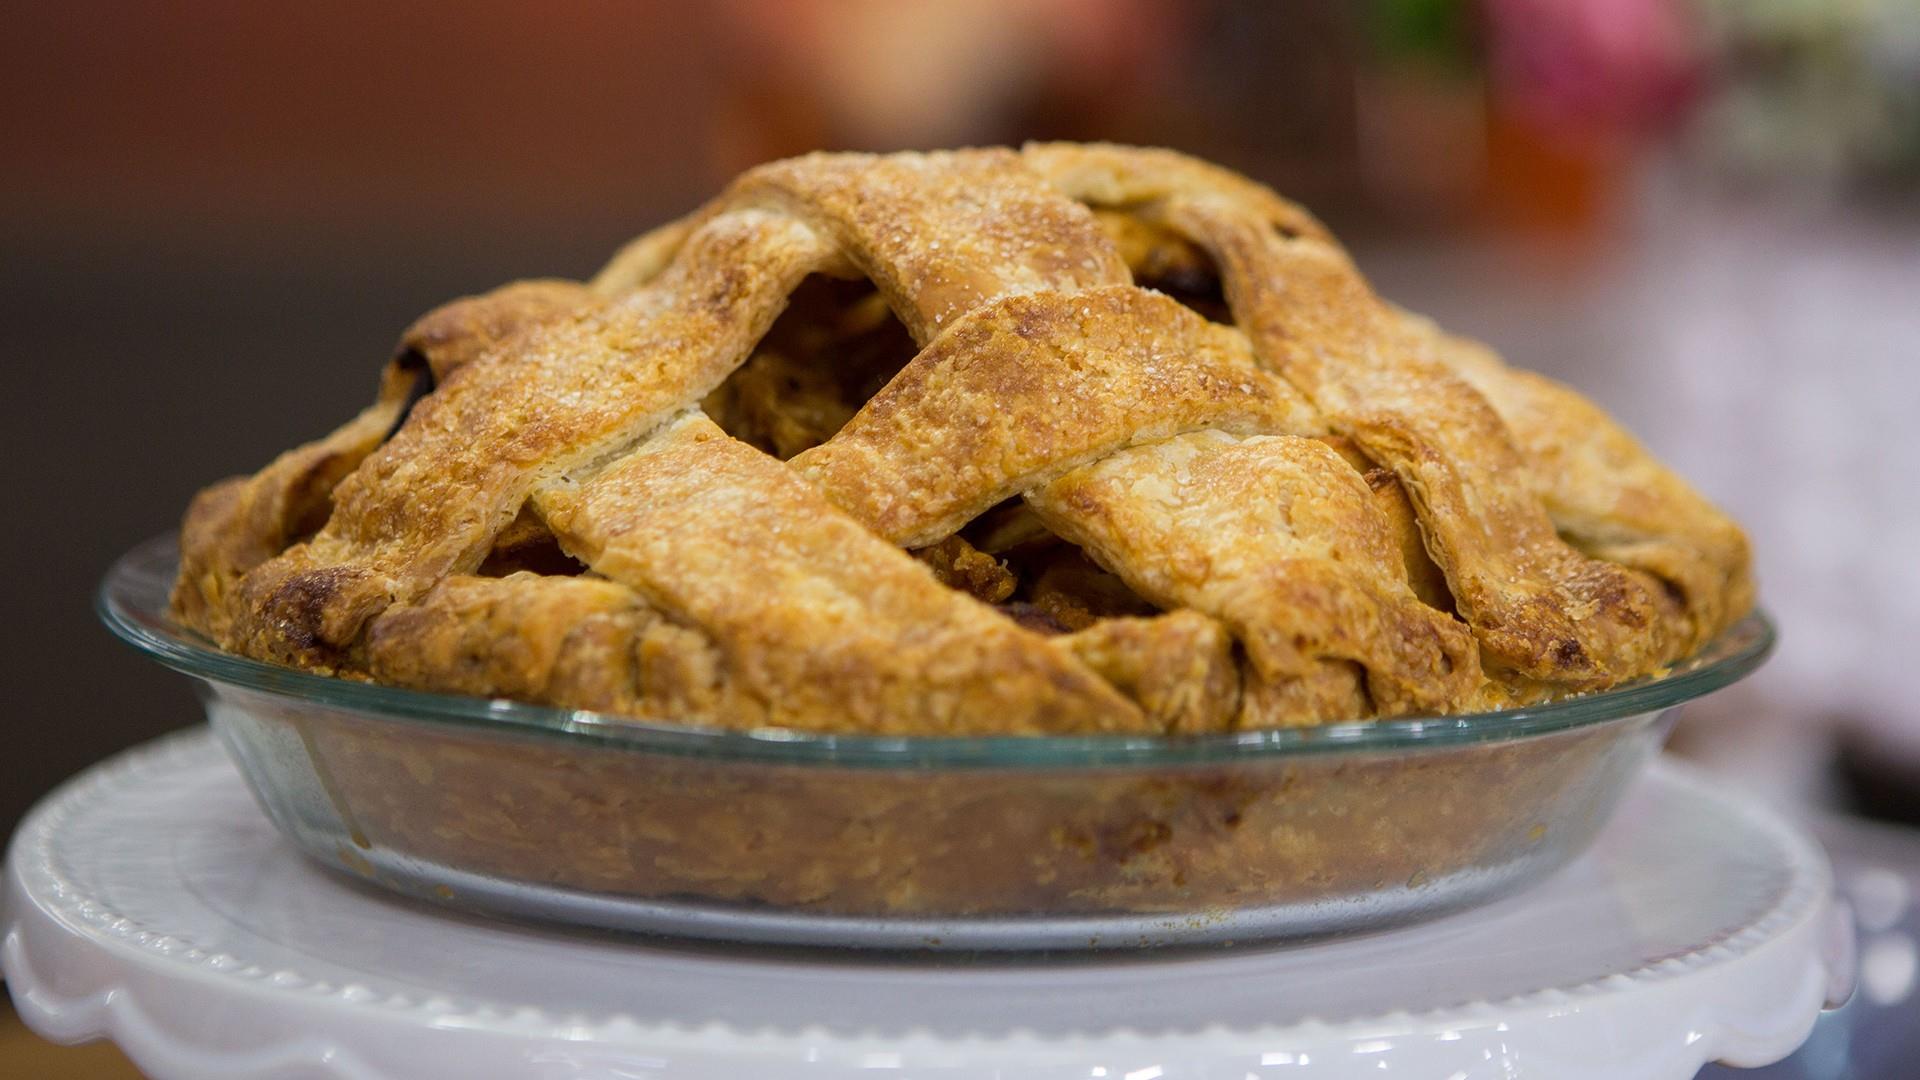 Restaurant Chains Offer Deals To Celebrate National Pi Day